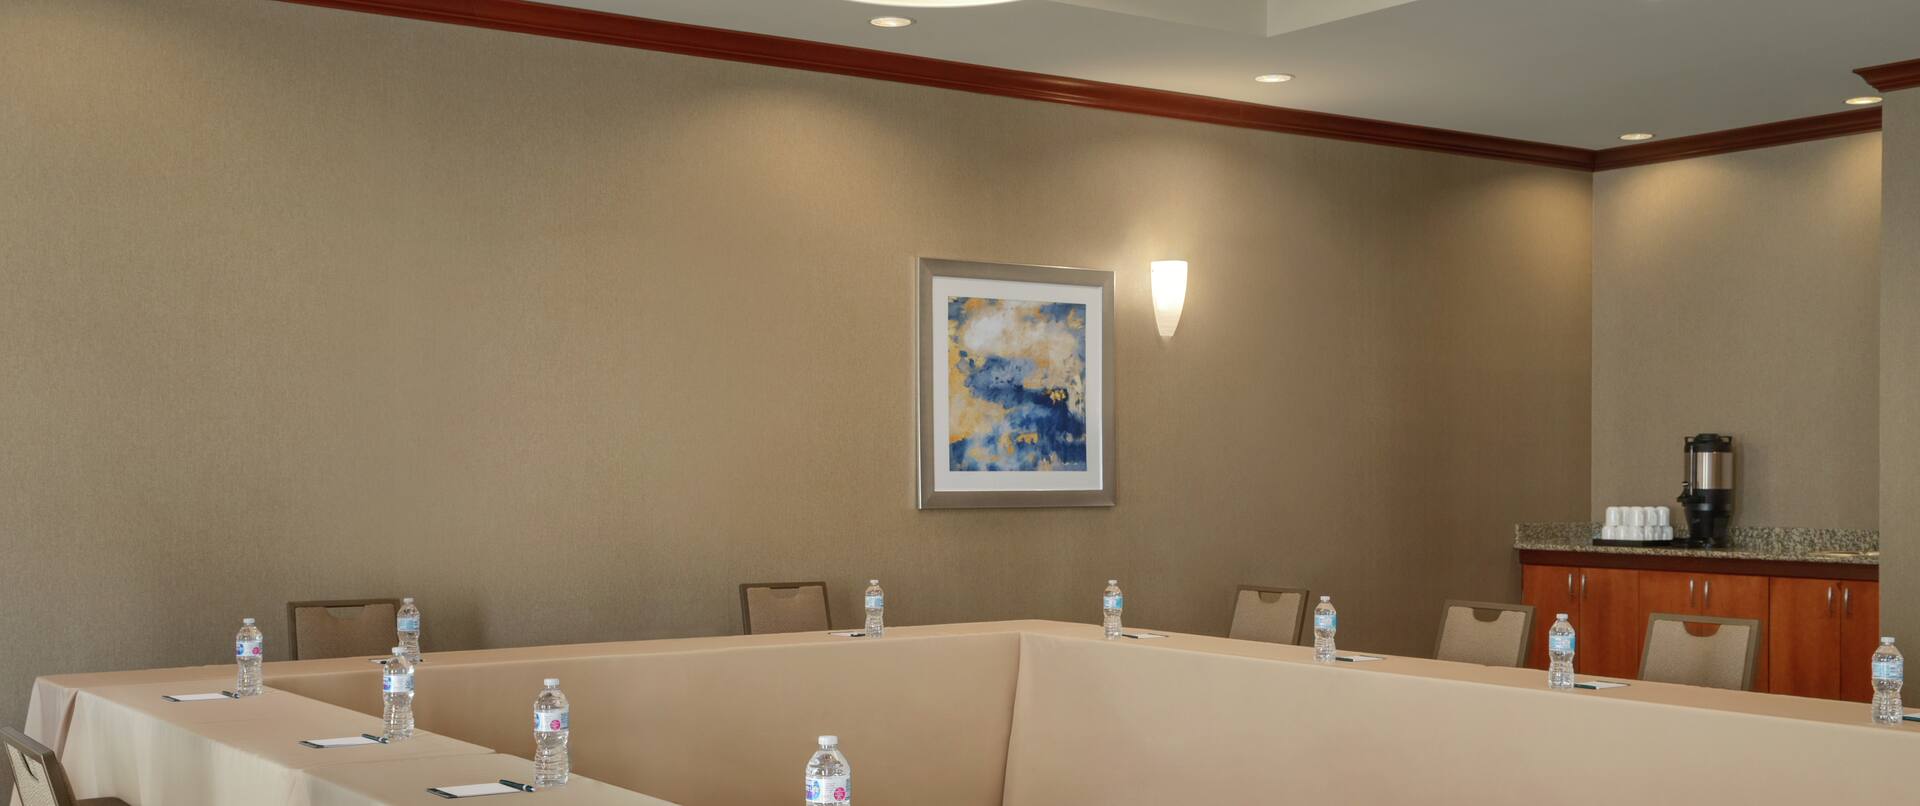 Spacious meeting room fully equipped with u shape table, notepads with pens, and refreshments.